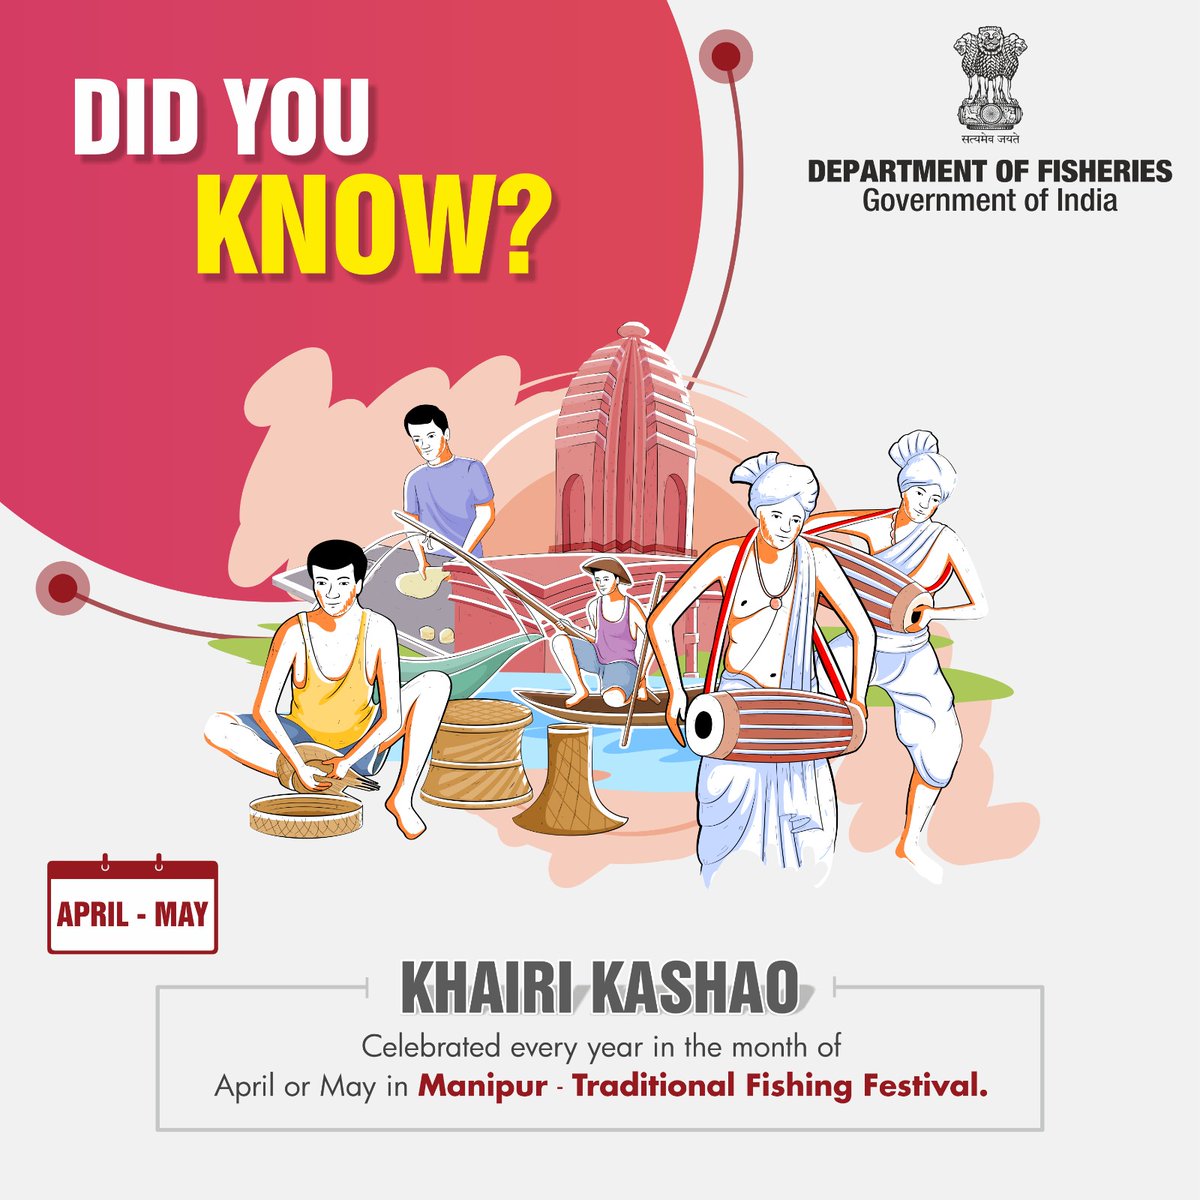 Manipur celebrates the khairi kashao a traditional Fishing Festival. It promotes the old methodology of fishing. #FishFestival #KhairiKashao